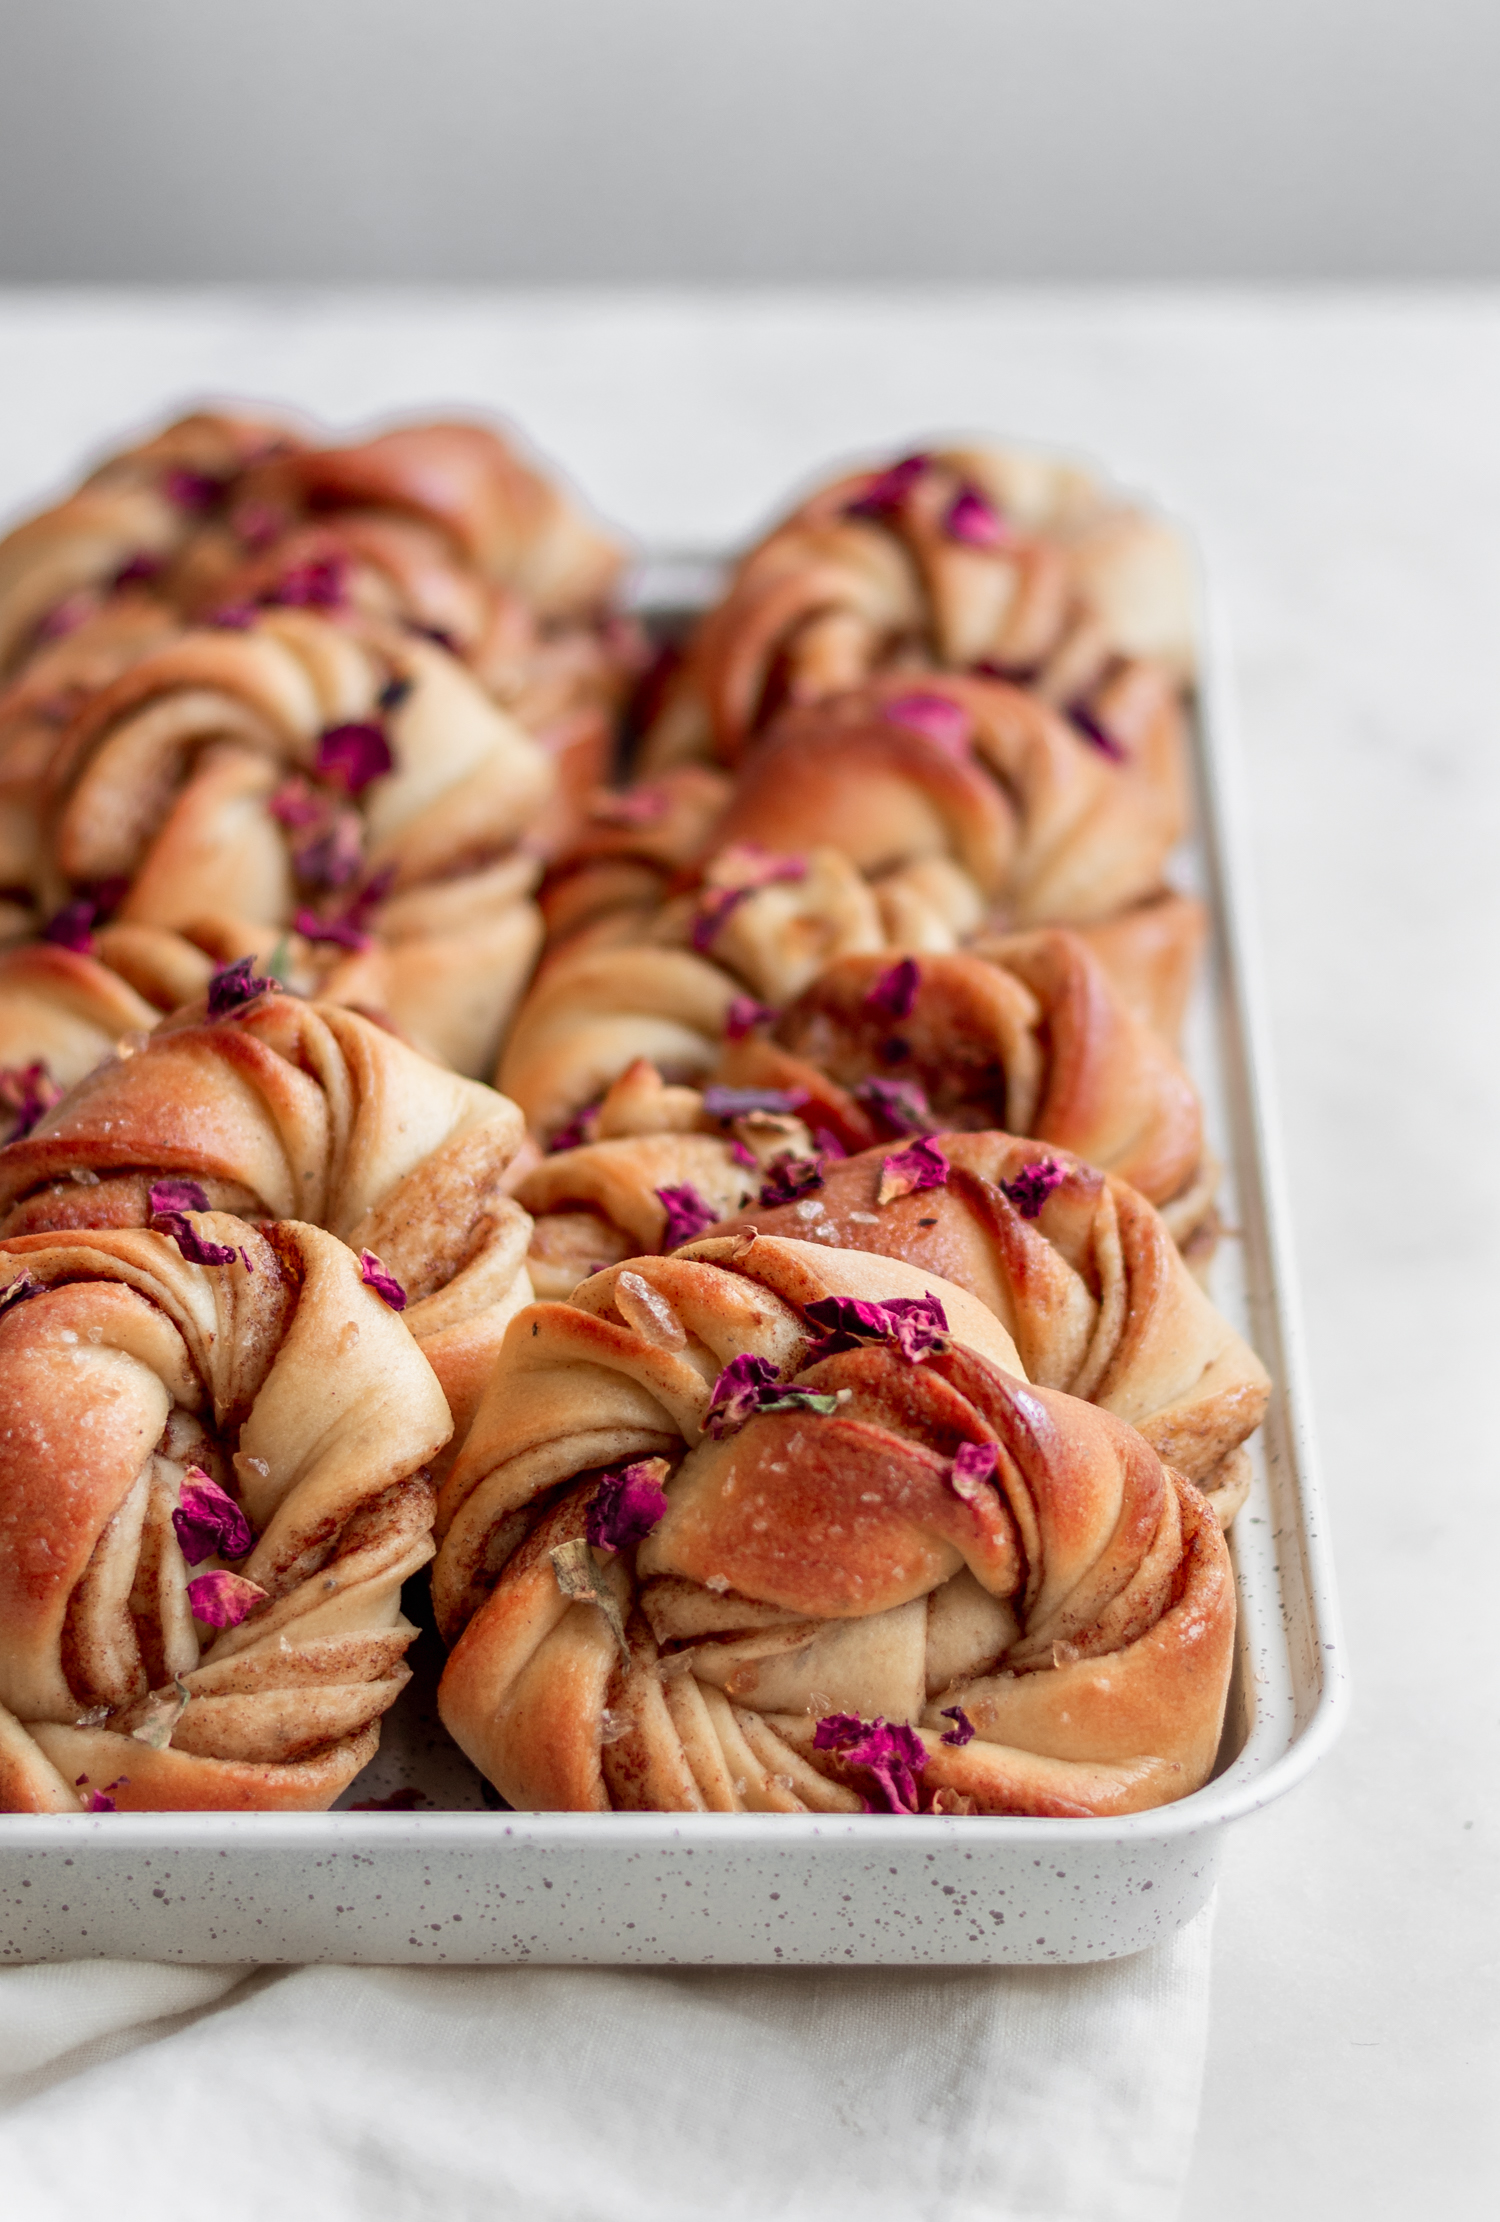 A very closeup image of rows of rose cardamom buns on a white counter.